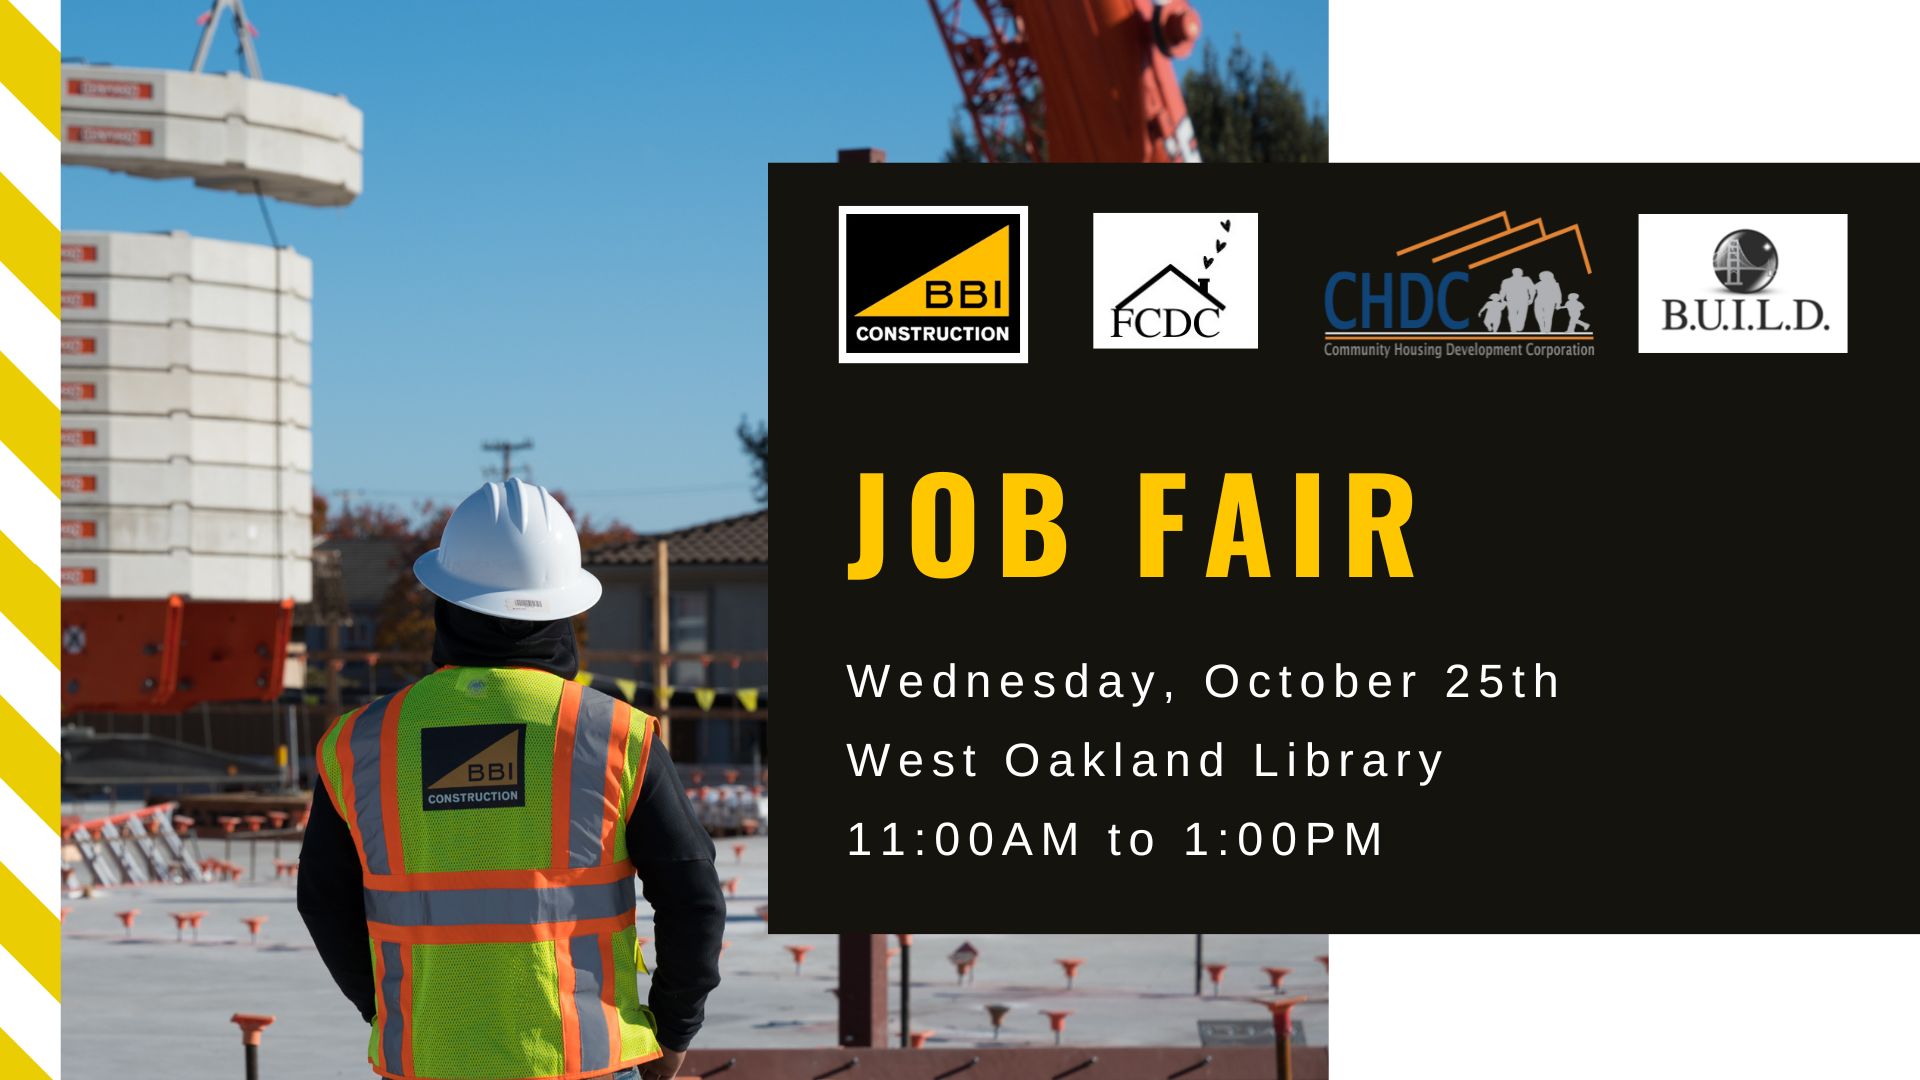 BBI Construction to Host Job Fair at West Oakland Library